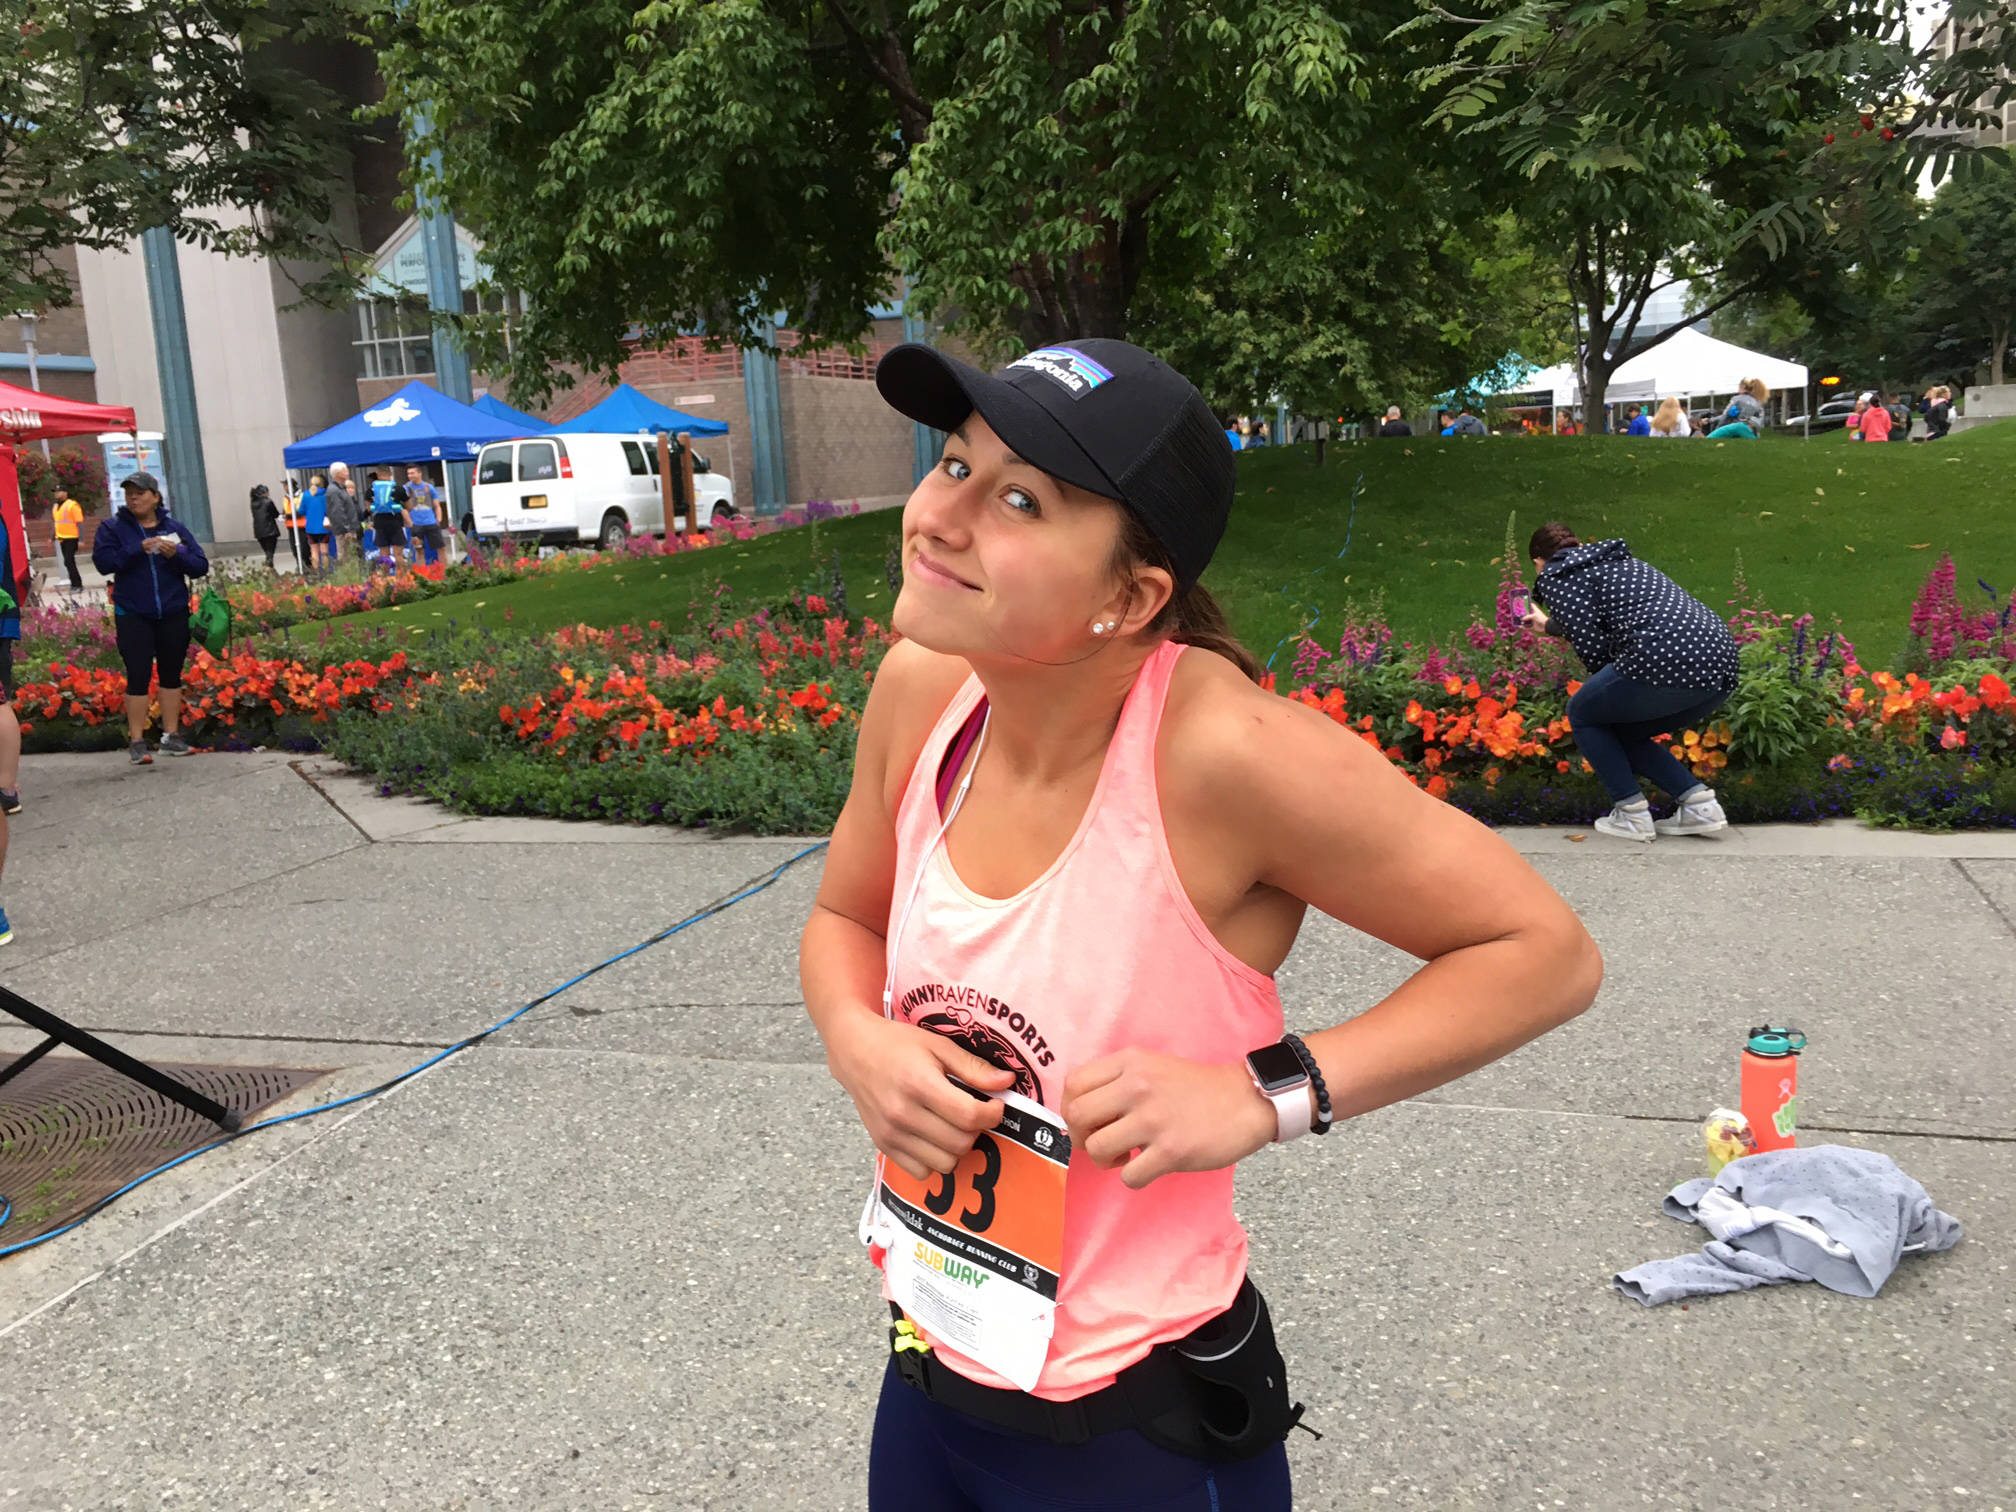 Lauren Kuhns at the Humpy’s Marathon Sunday, Aug. 20, 2017 in Anchorage, Alaska. She won the race — and her first marathon — with a time of 3 hours, 17 minutes and 37 seconds. (Photo provided)